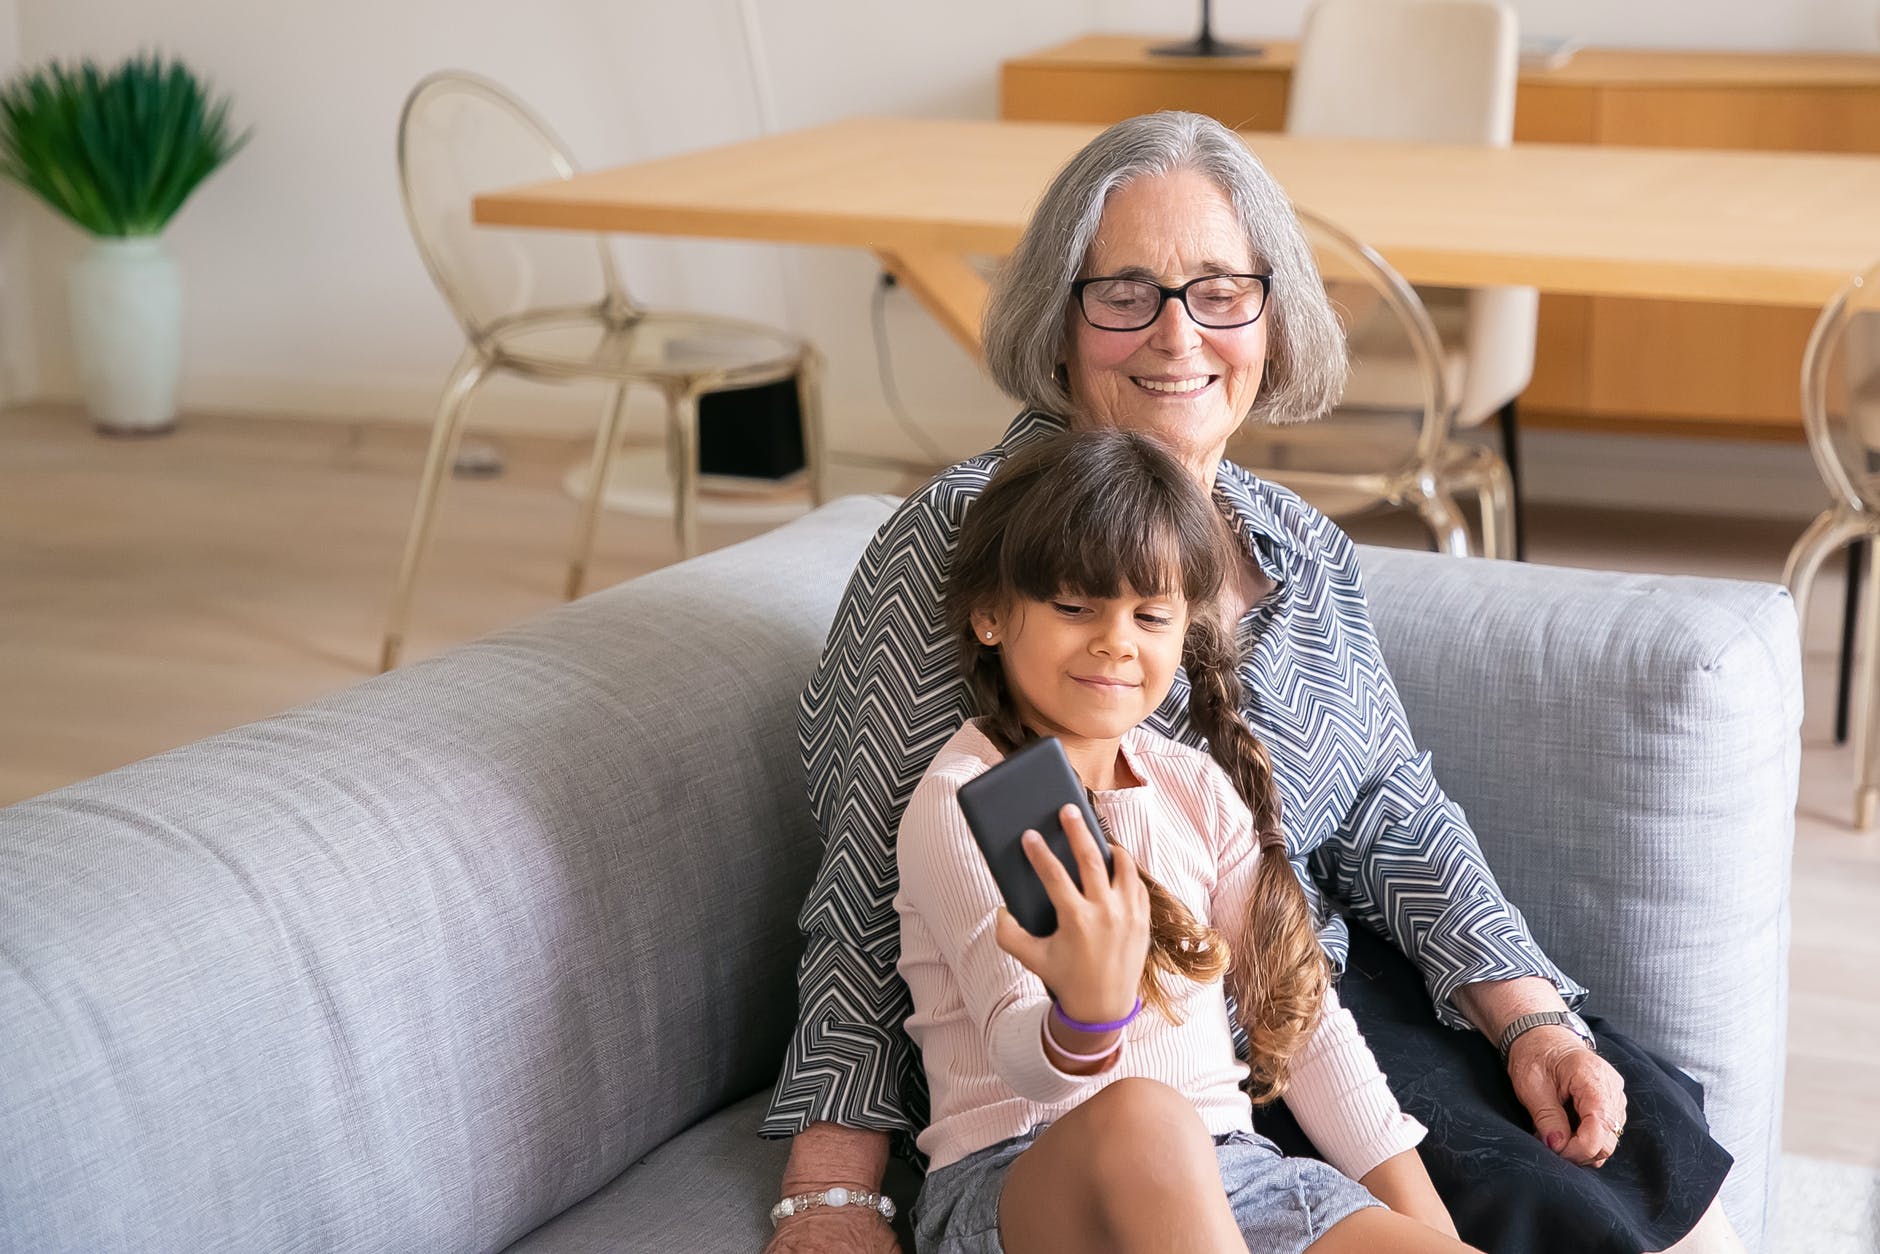 She moved in with her daughter and loved being around her grandkids. | Source: Pexels